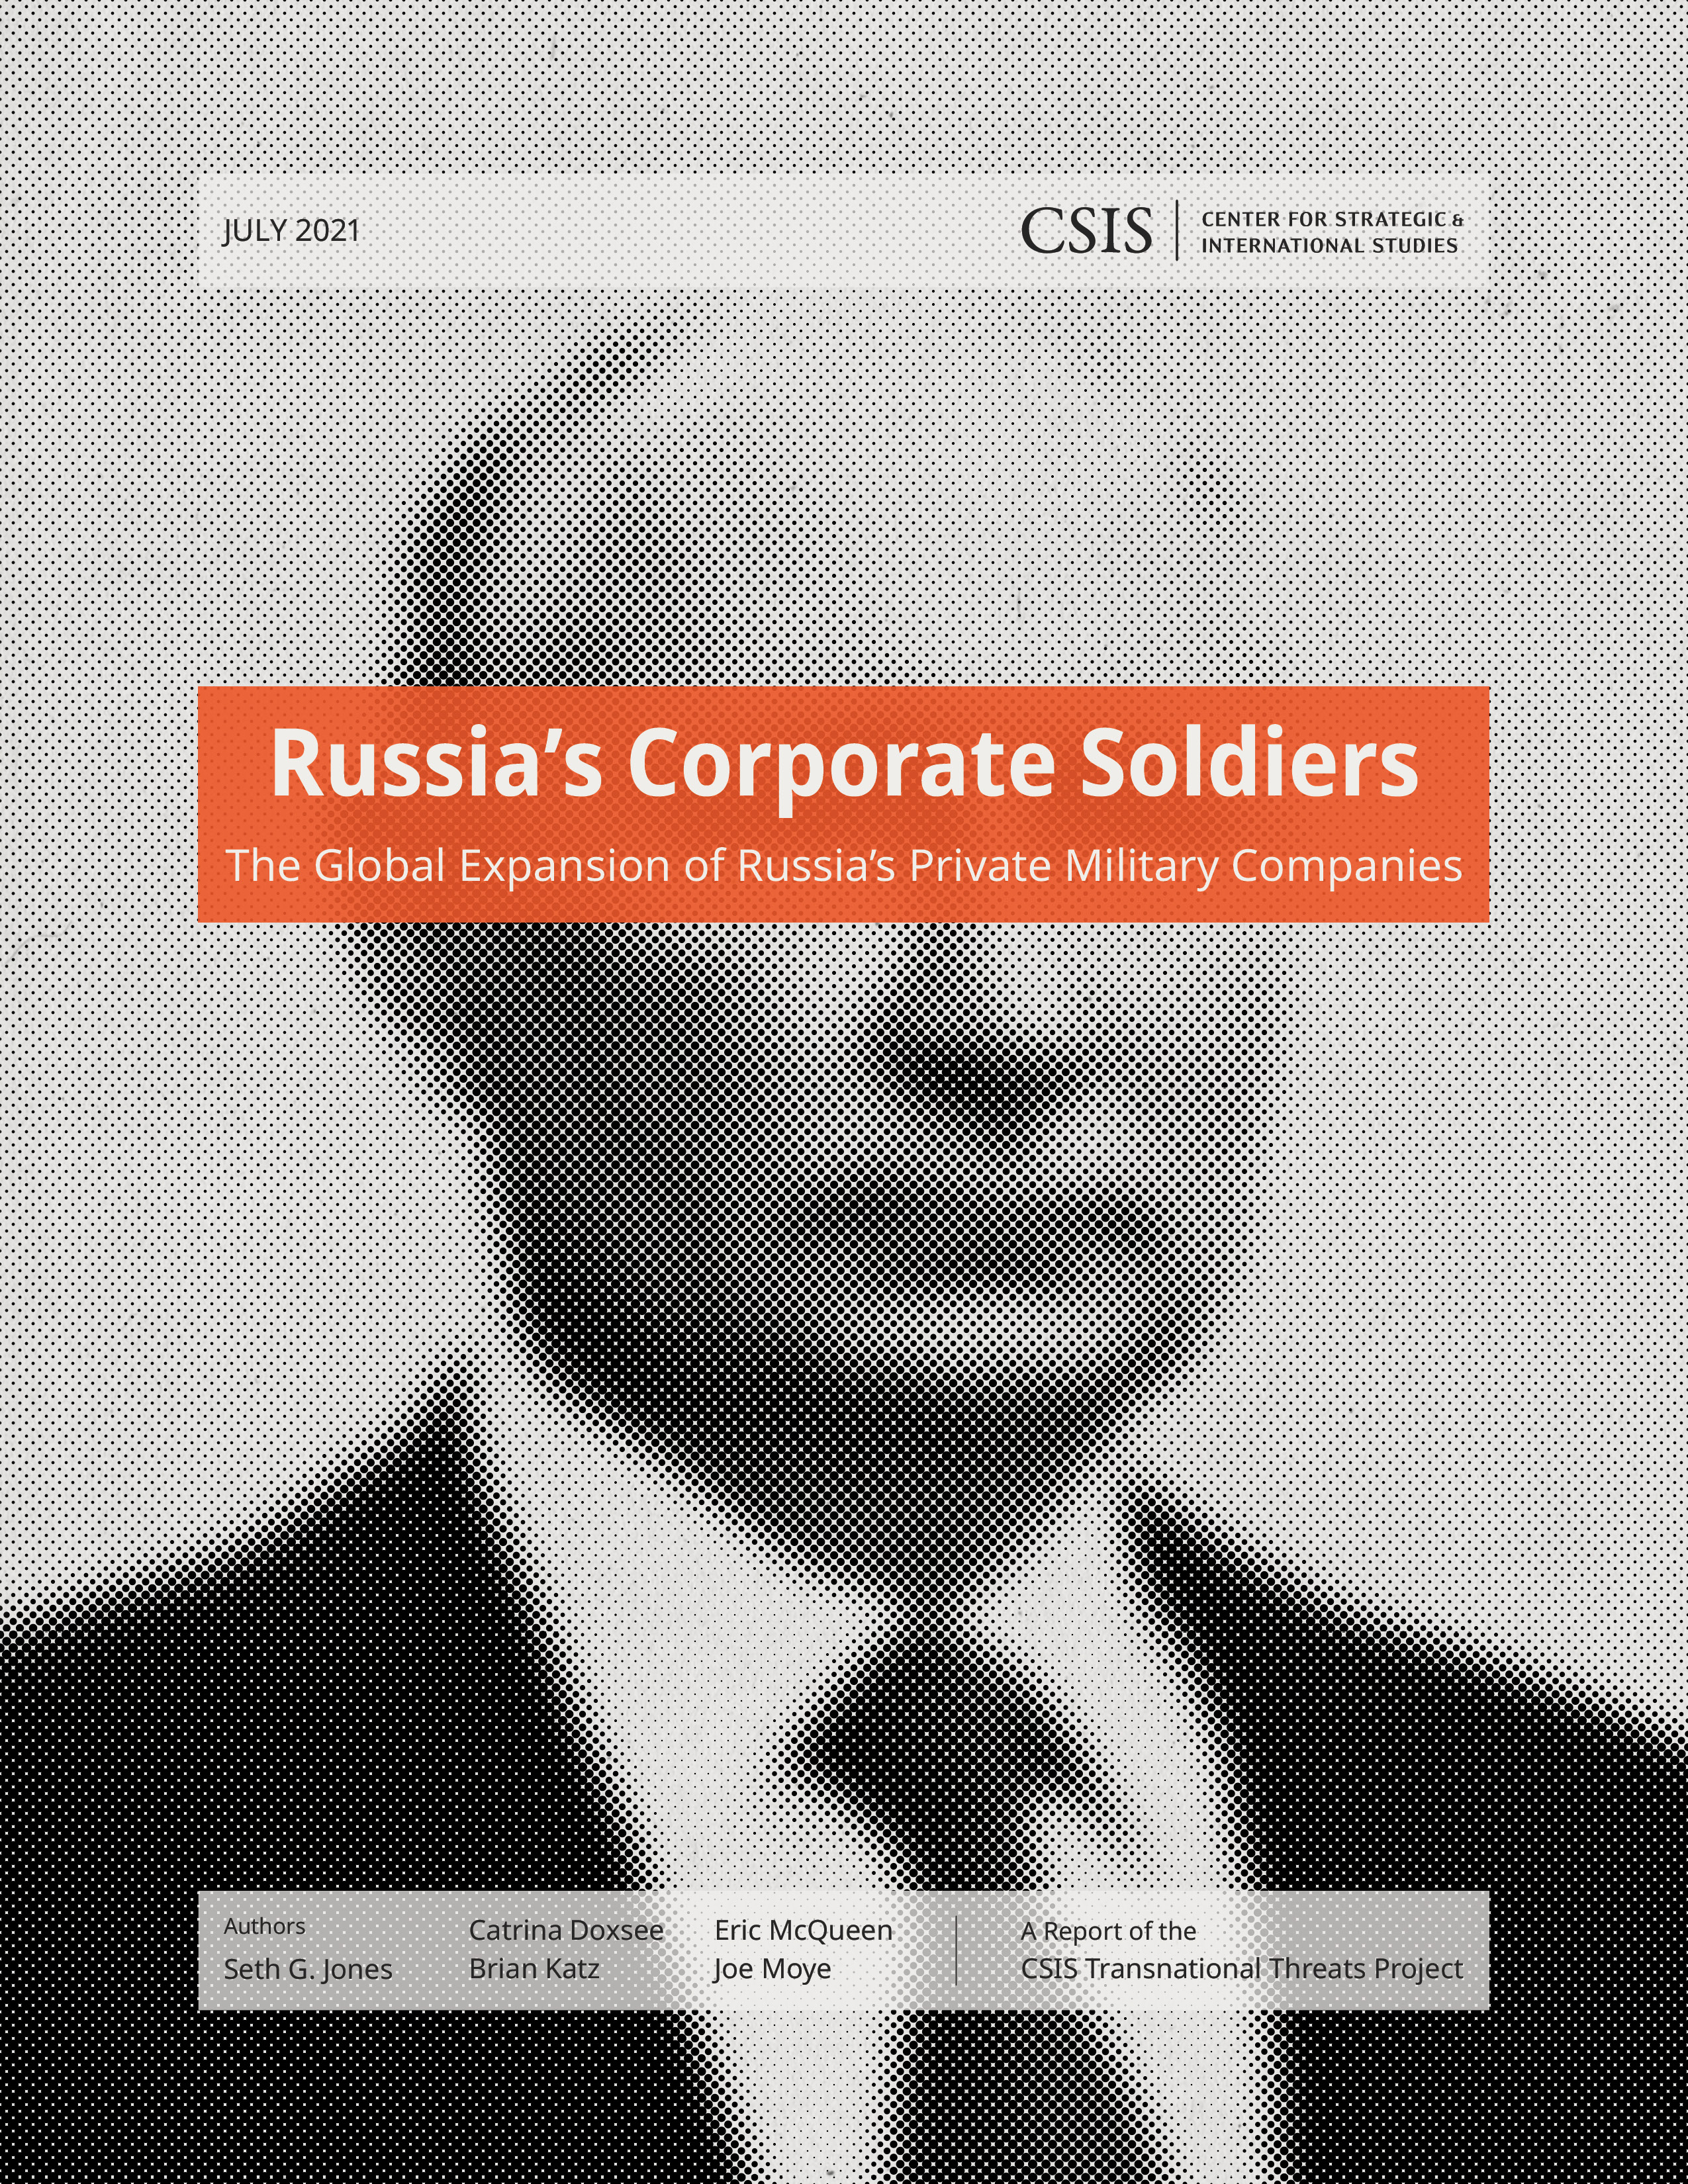 Russia’s Corporate Soldiers: The Global Expansion of Russia’s Private Military Companies